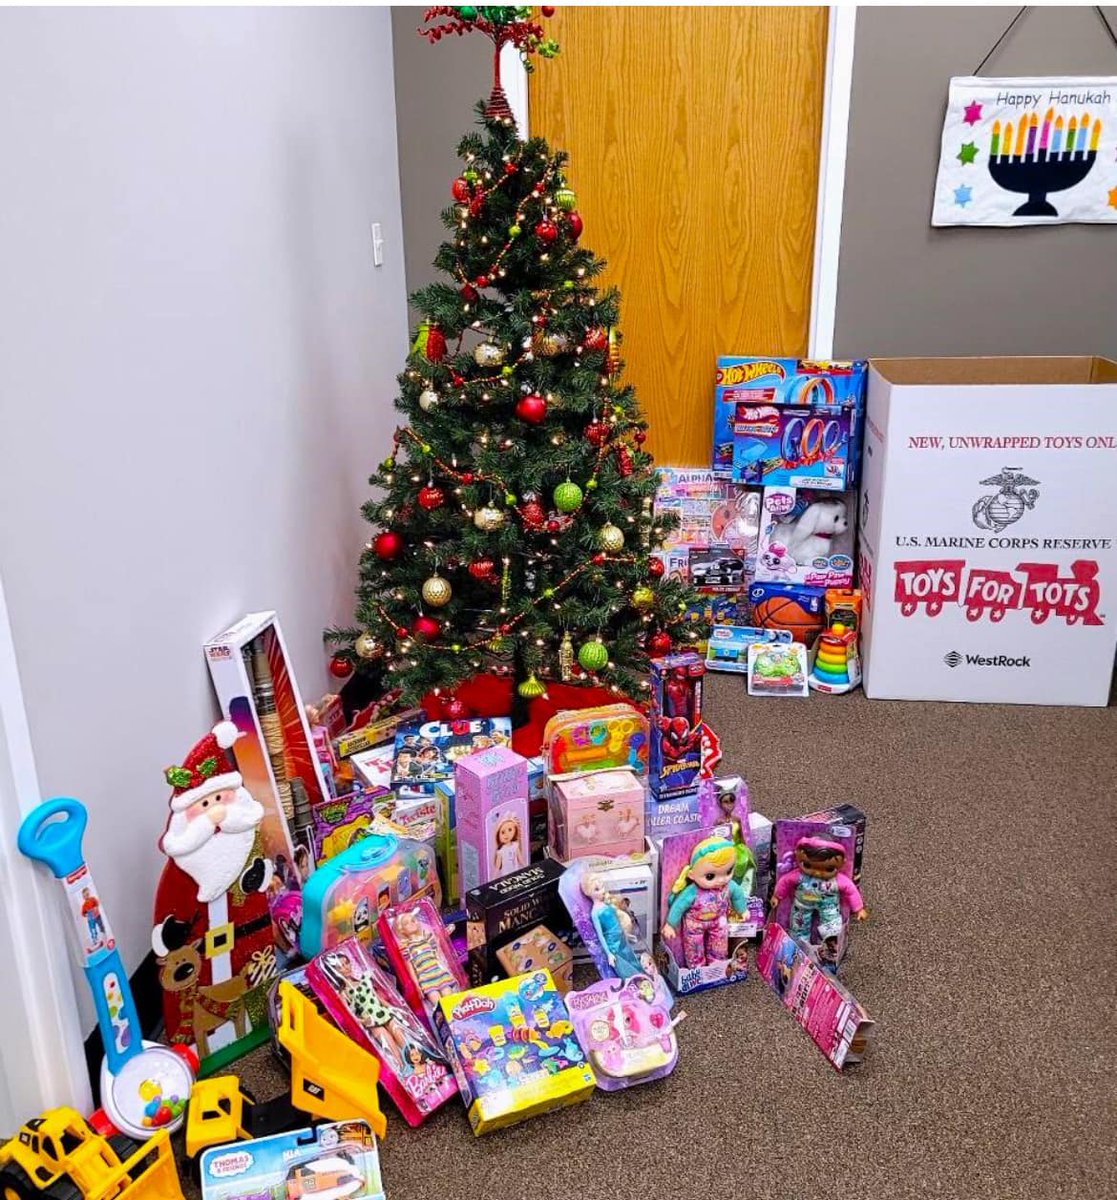 I would like to express my heartfelt gratitude to everyone who donated to this year’s Toys for Tots drive & for helping to bring holiday cheer to children and families throughout Long Island. Thank you for your generosity. Have a very Merry Christmas and the happiest of holidays